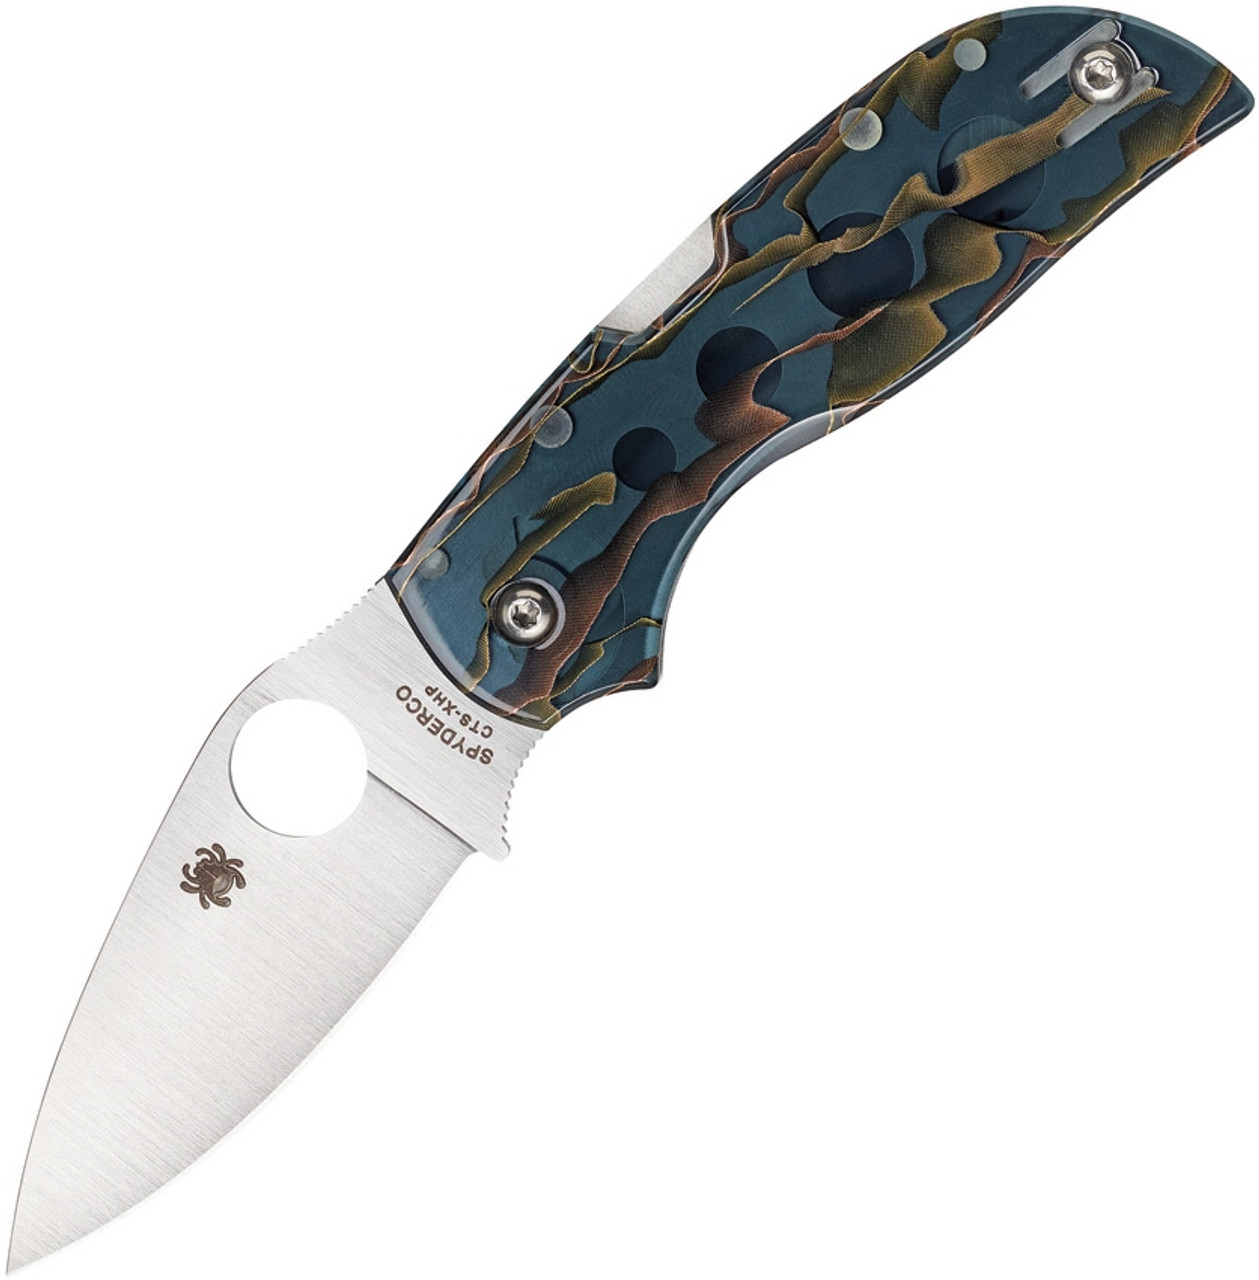 Spyderco Chaparral Raffir Noble - CTS-XHP stainless